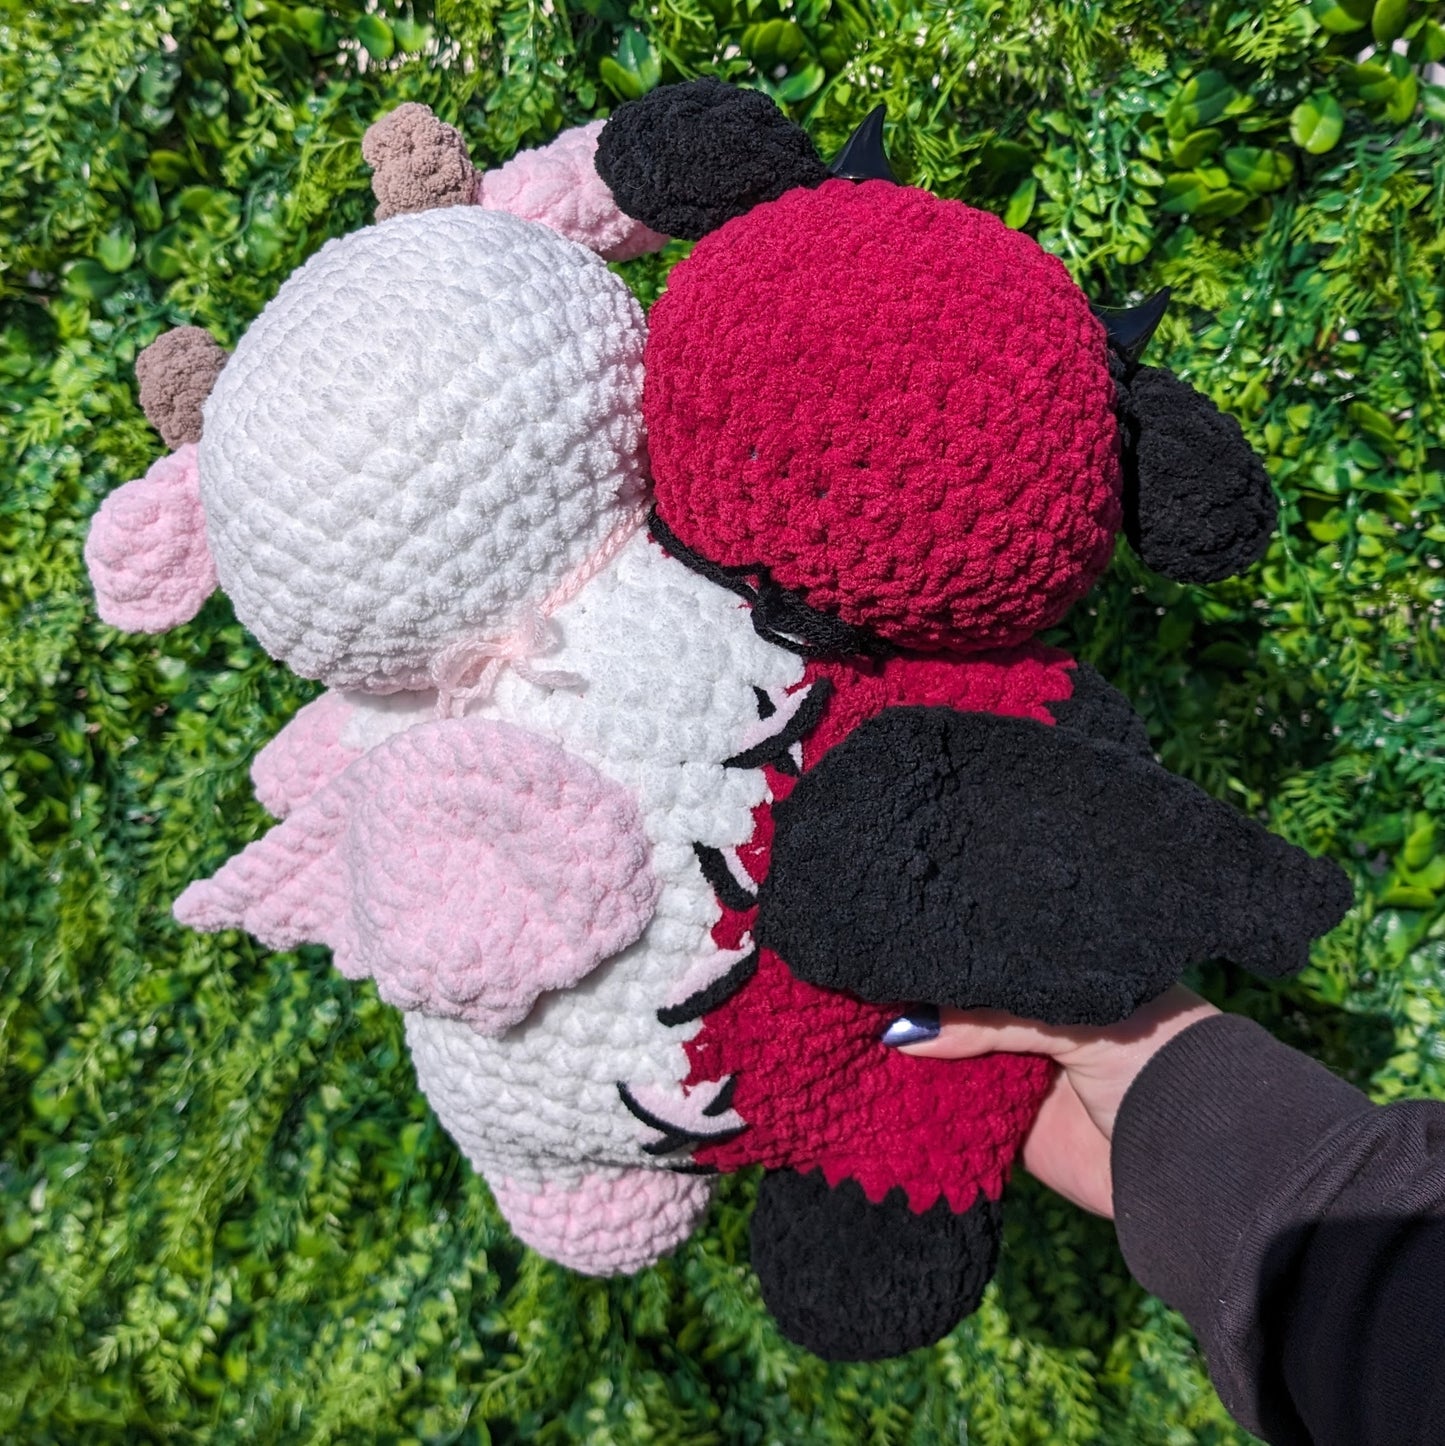 Jumbo Good & Evil Two-Headed Cow Crochet Plushie [Archived]